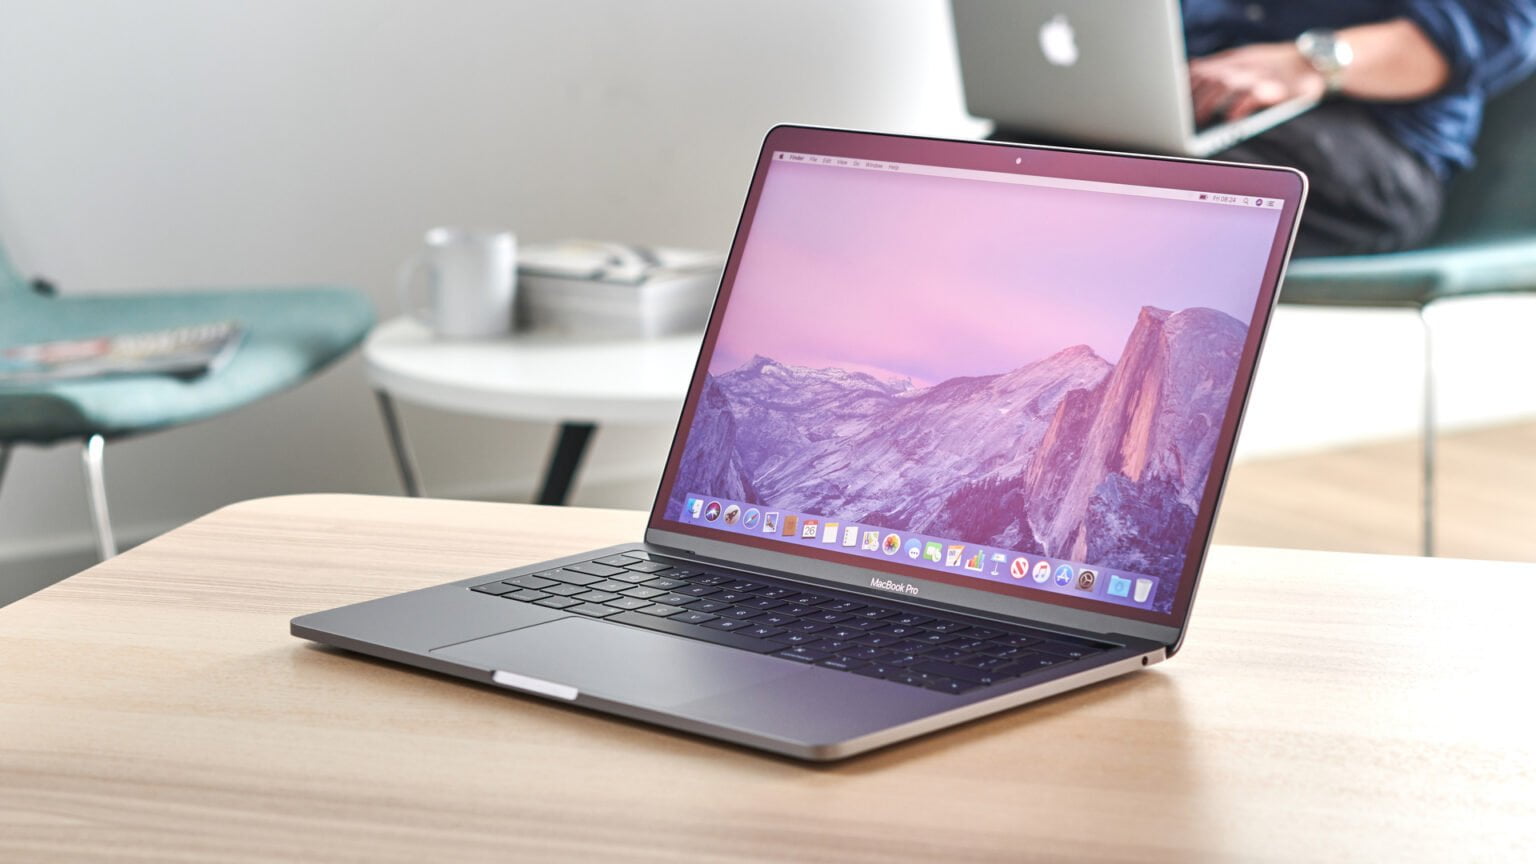 apple-macbook-pro-with-intel-i5-processor-amazon-rebate-at-rs-18000